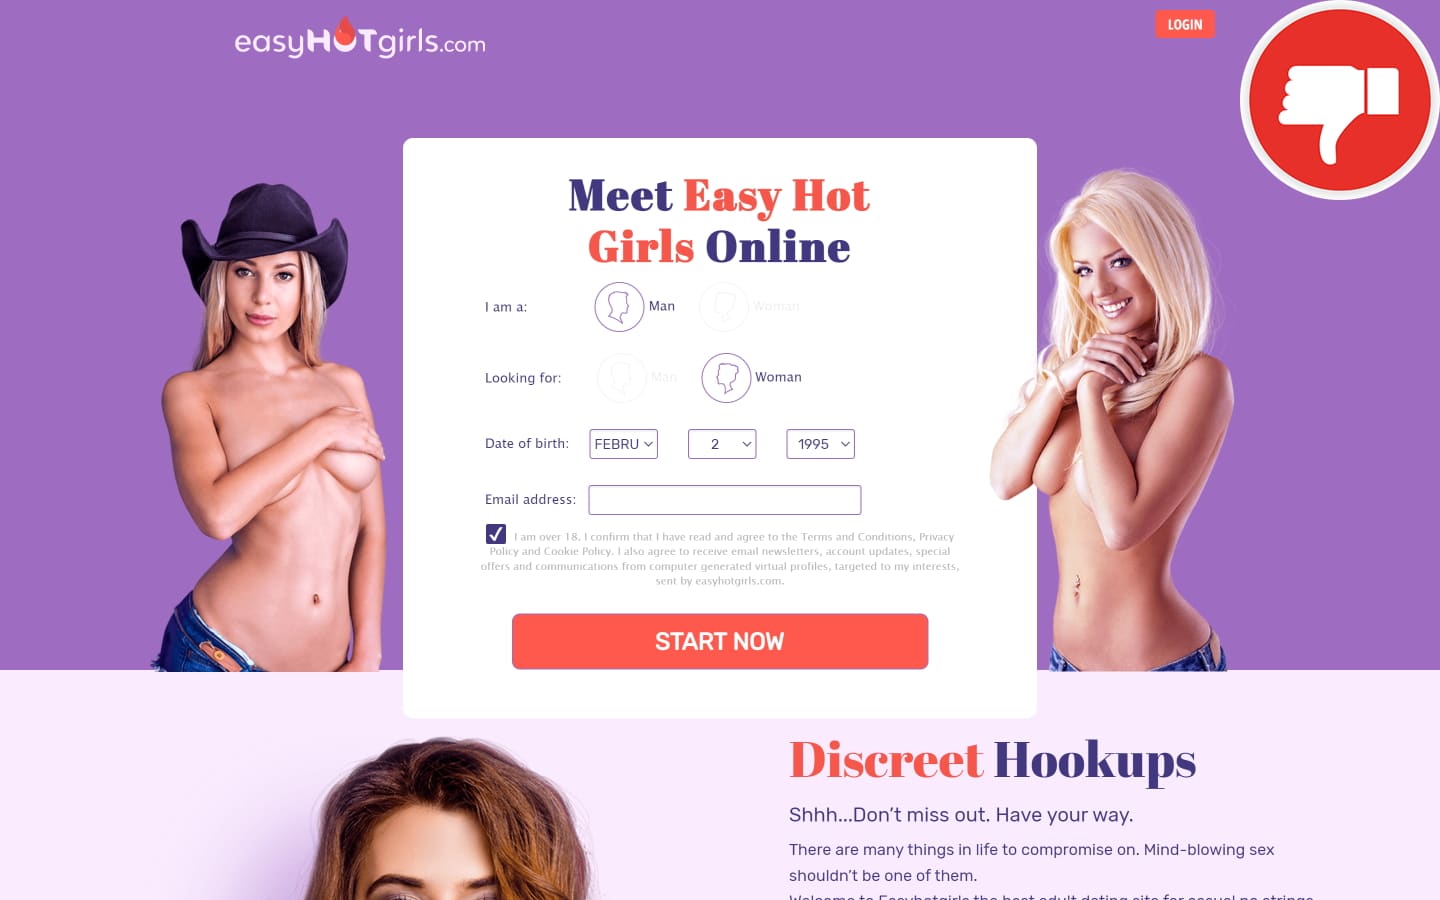 Review EasyHotGirls.com scam experience